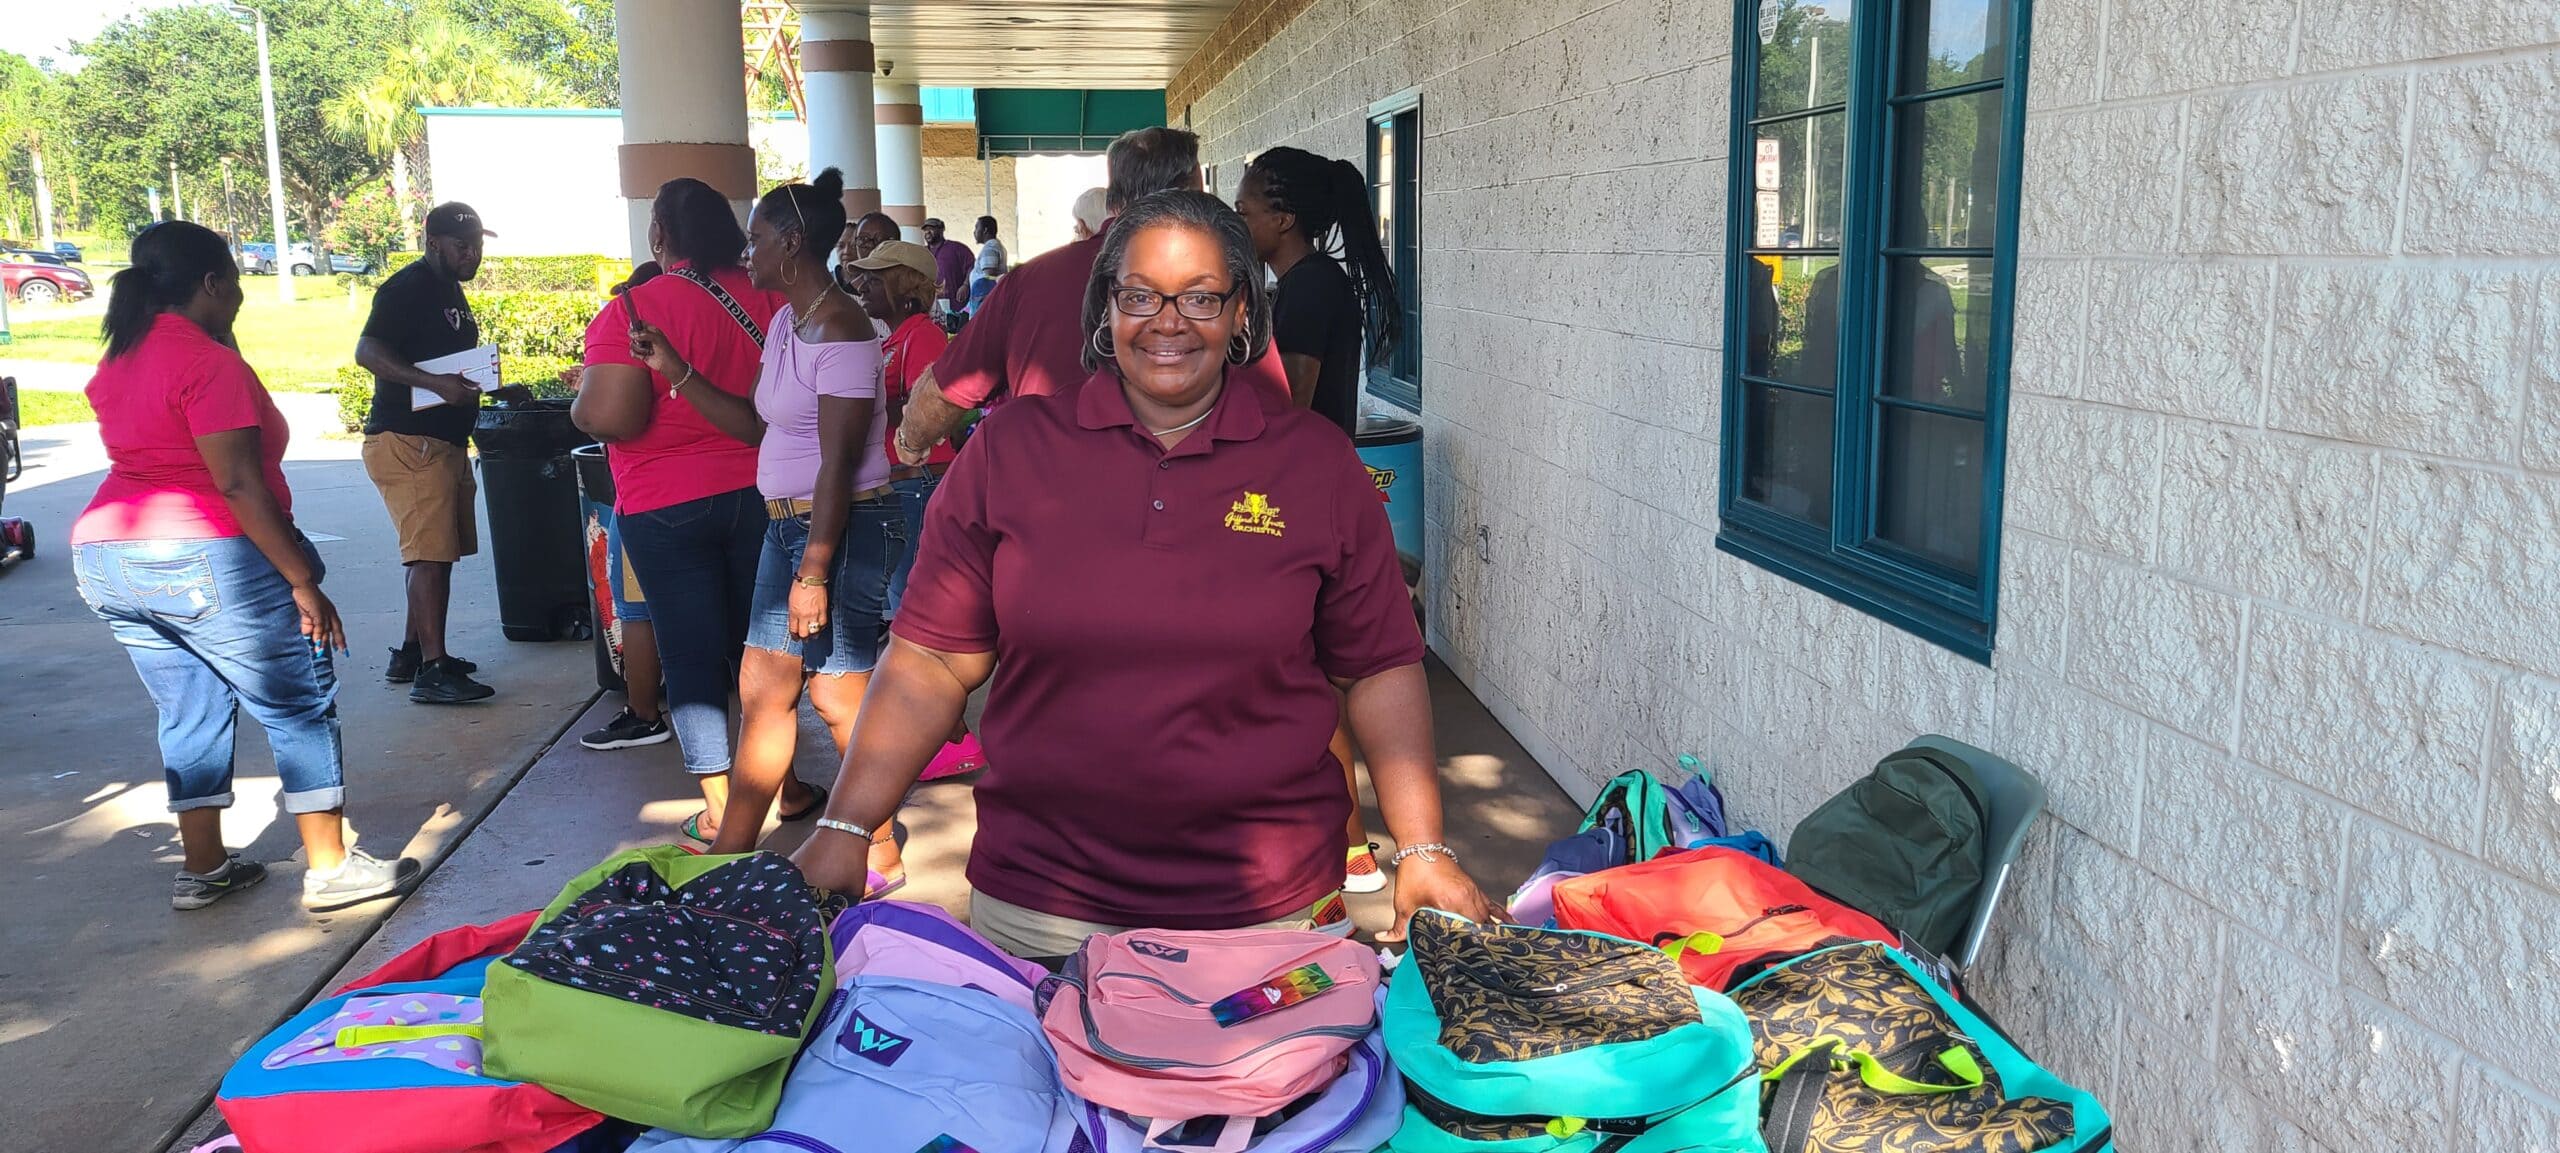 GYAC’s Back to School Supply Drive & Giveaway